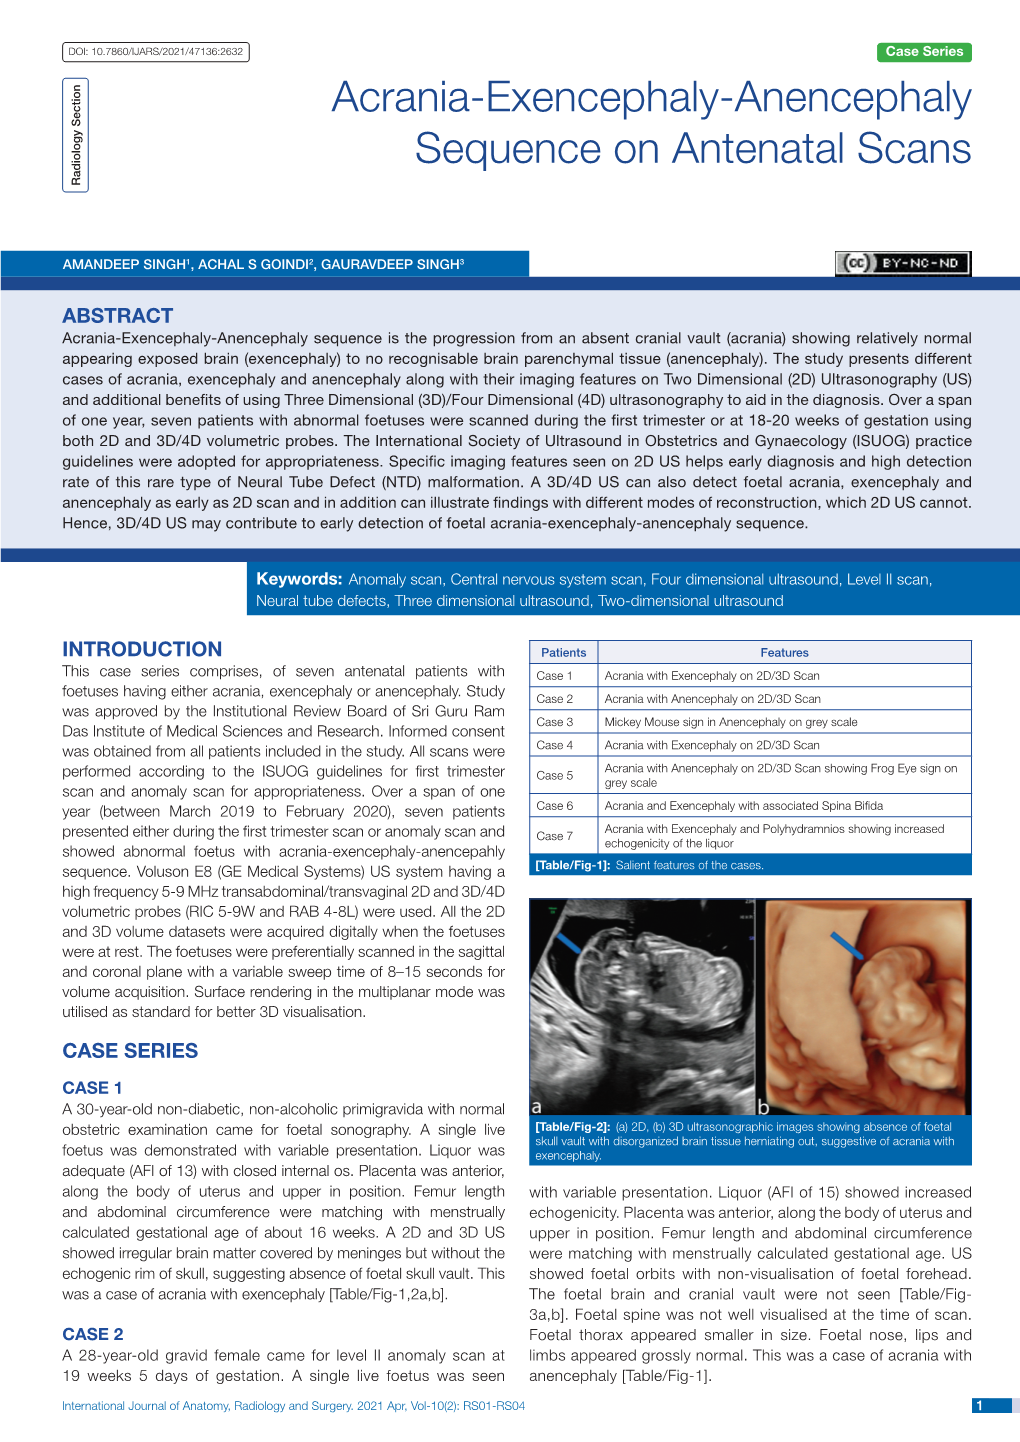 Acrania-Exencephaly-Anencephaly Sequence on Antenatal Scans Radiology Section